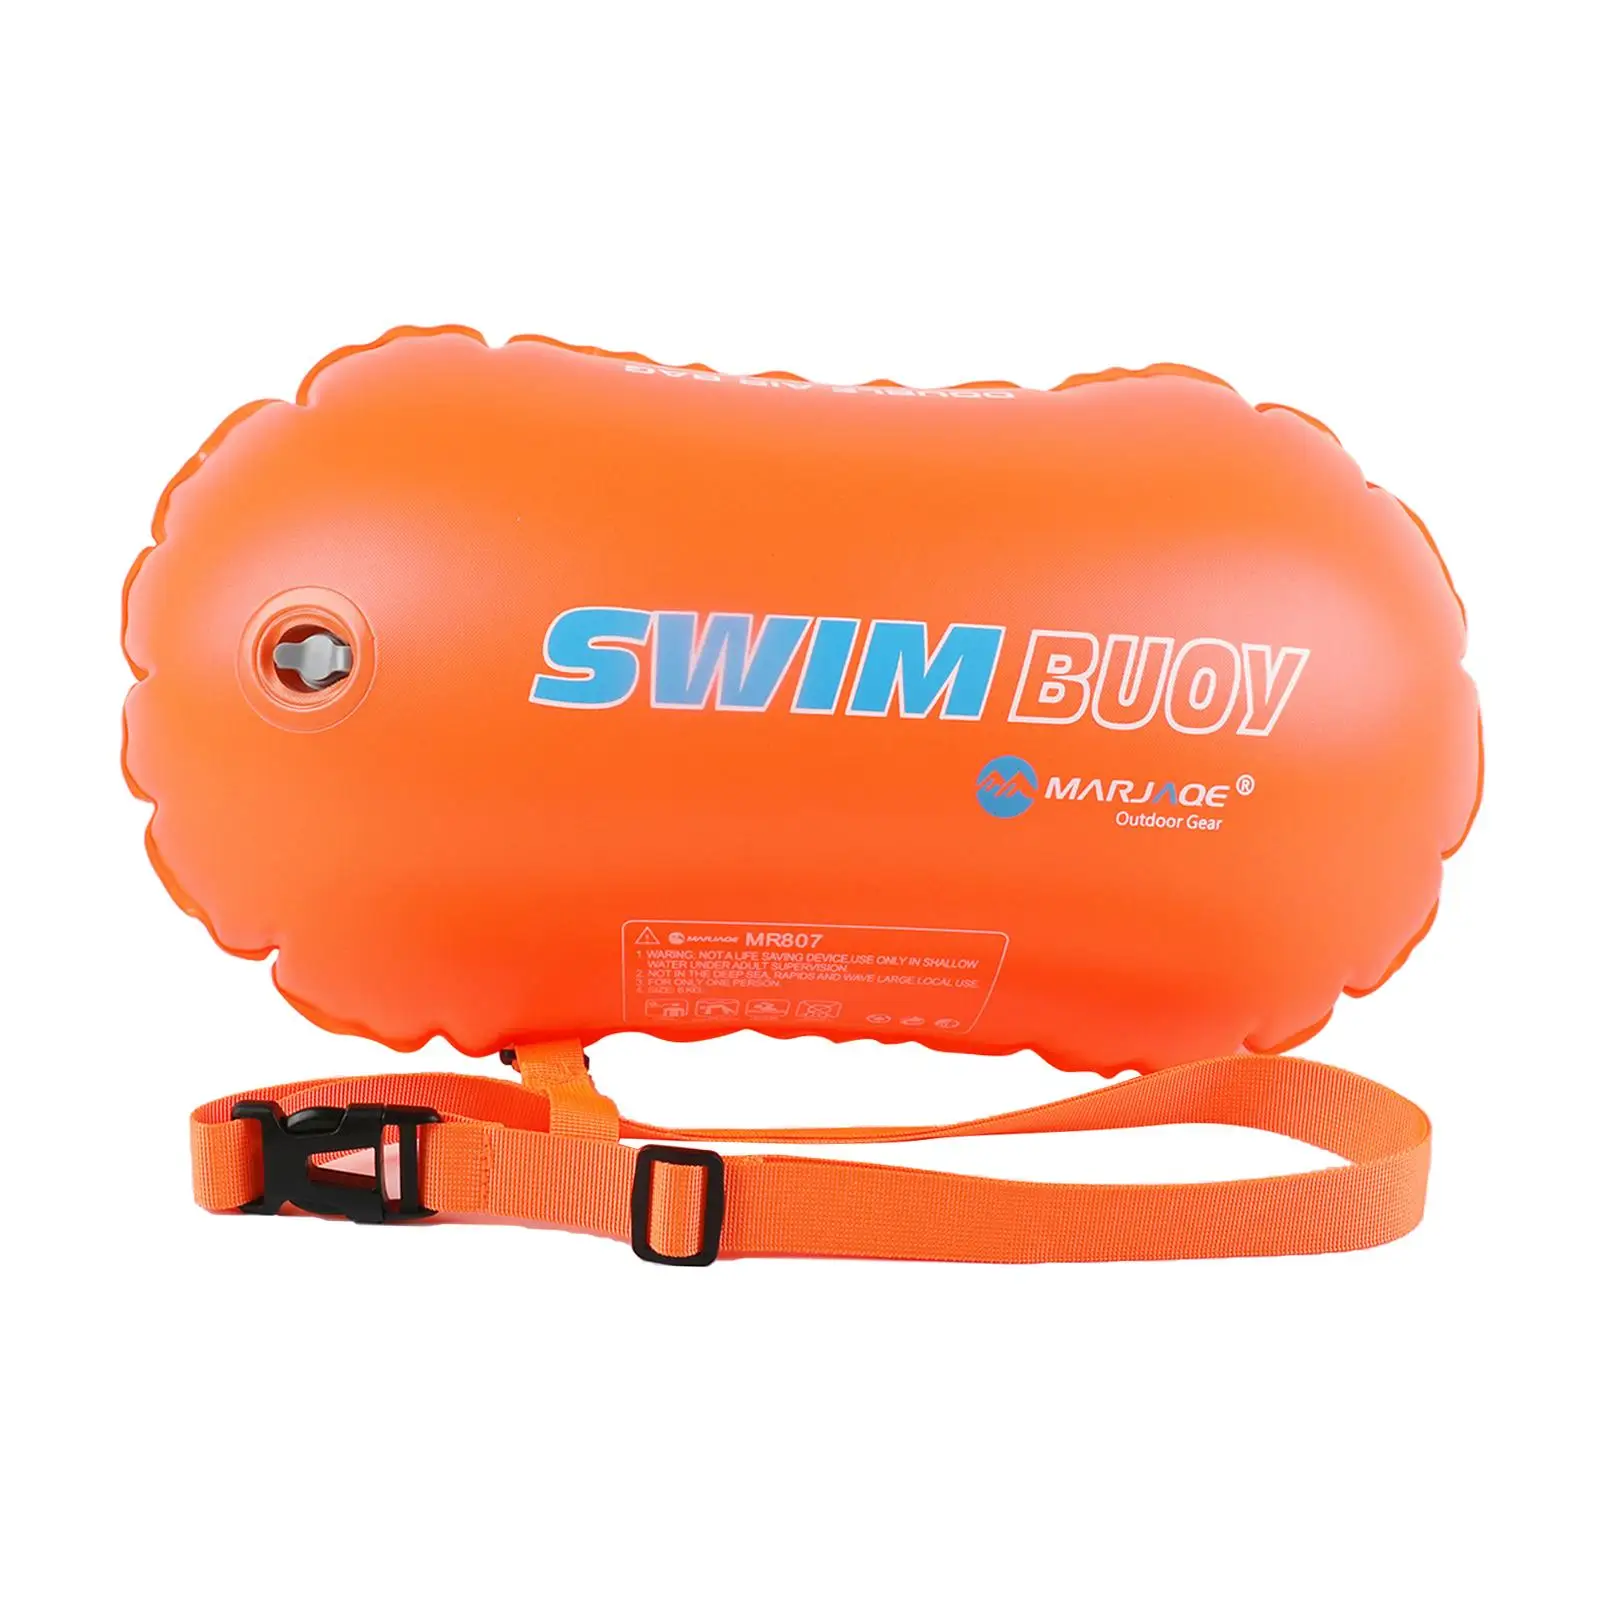 High Visible Safety Swim Buoy  Bubble Tow Float for  Swimming Kayaking Snorkeling Diving Trailing with Adjustable Waist Belt